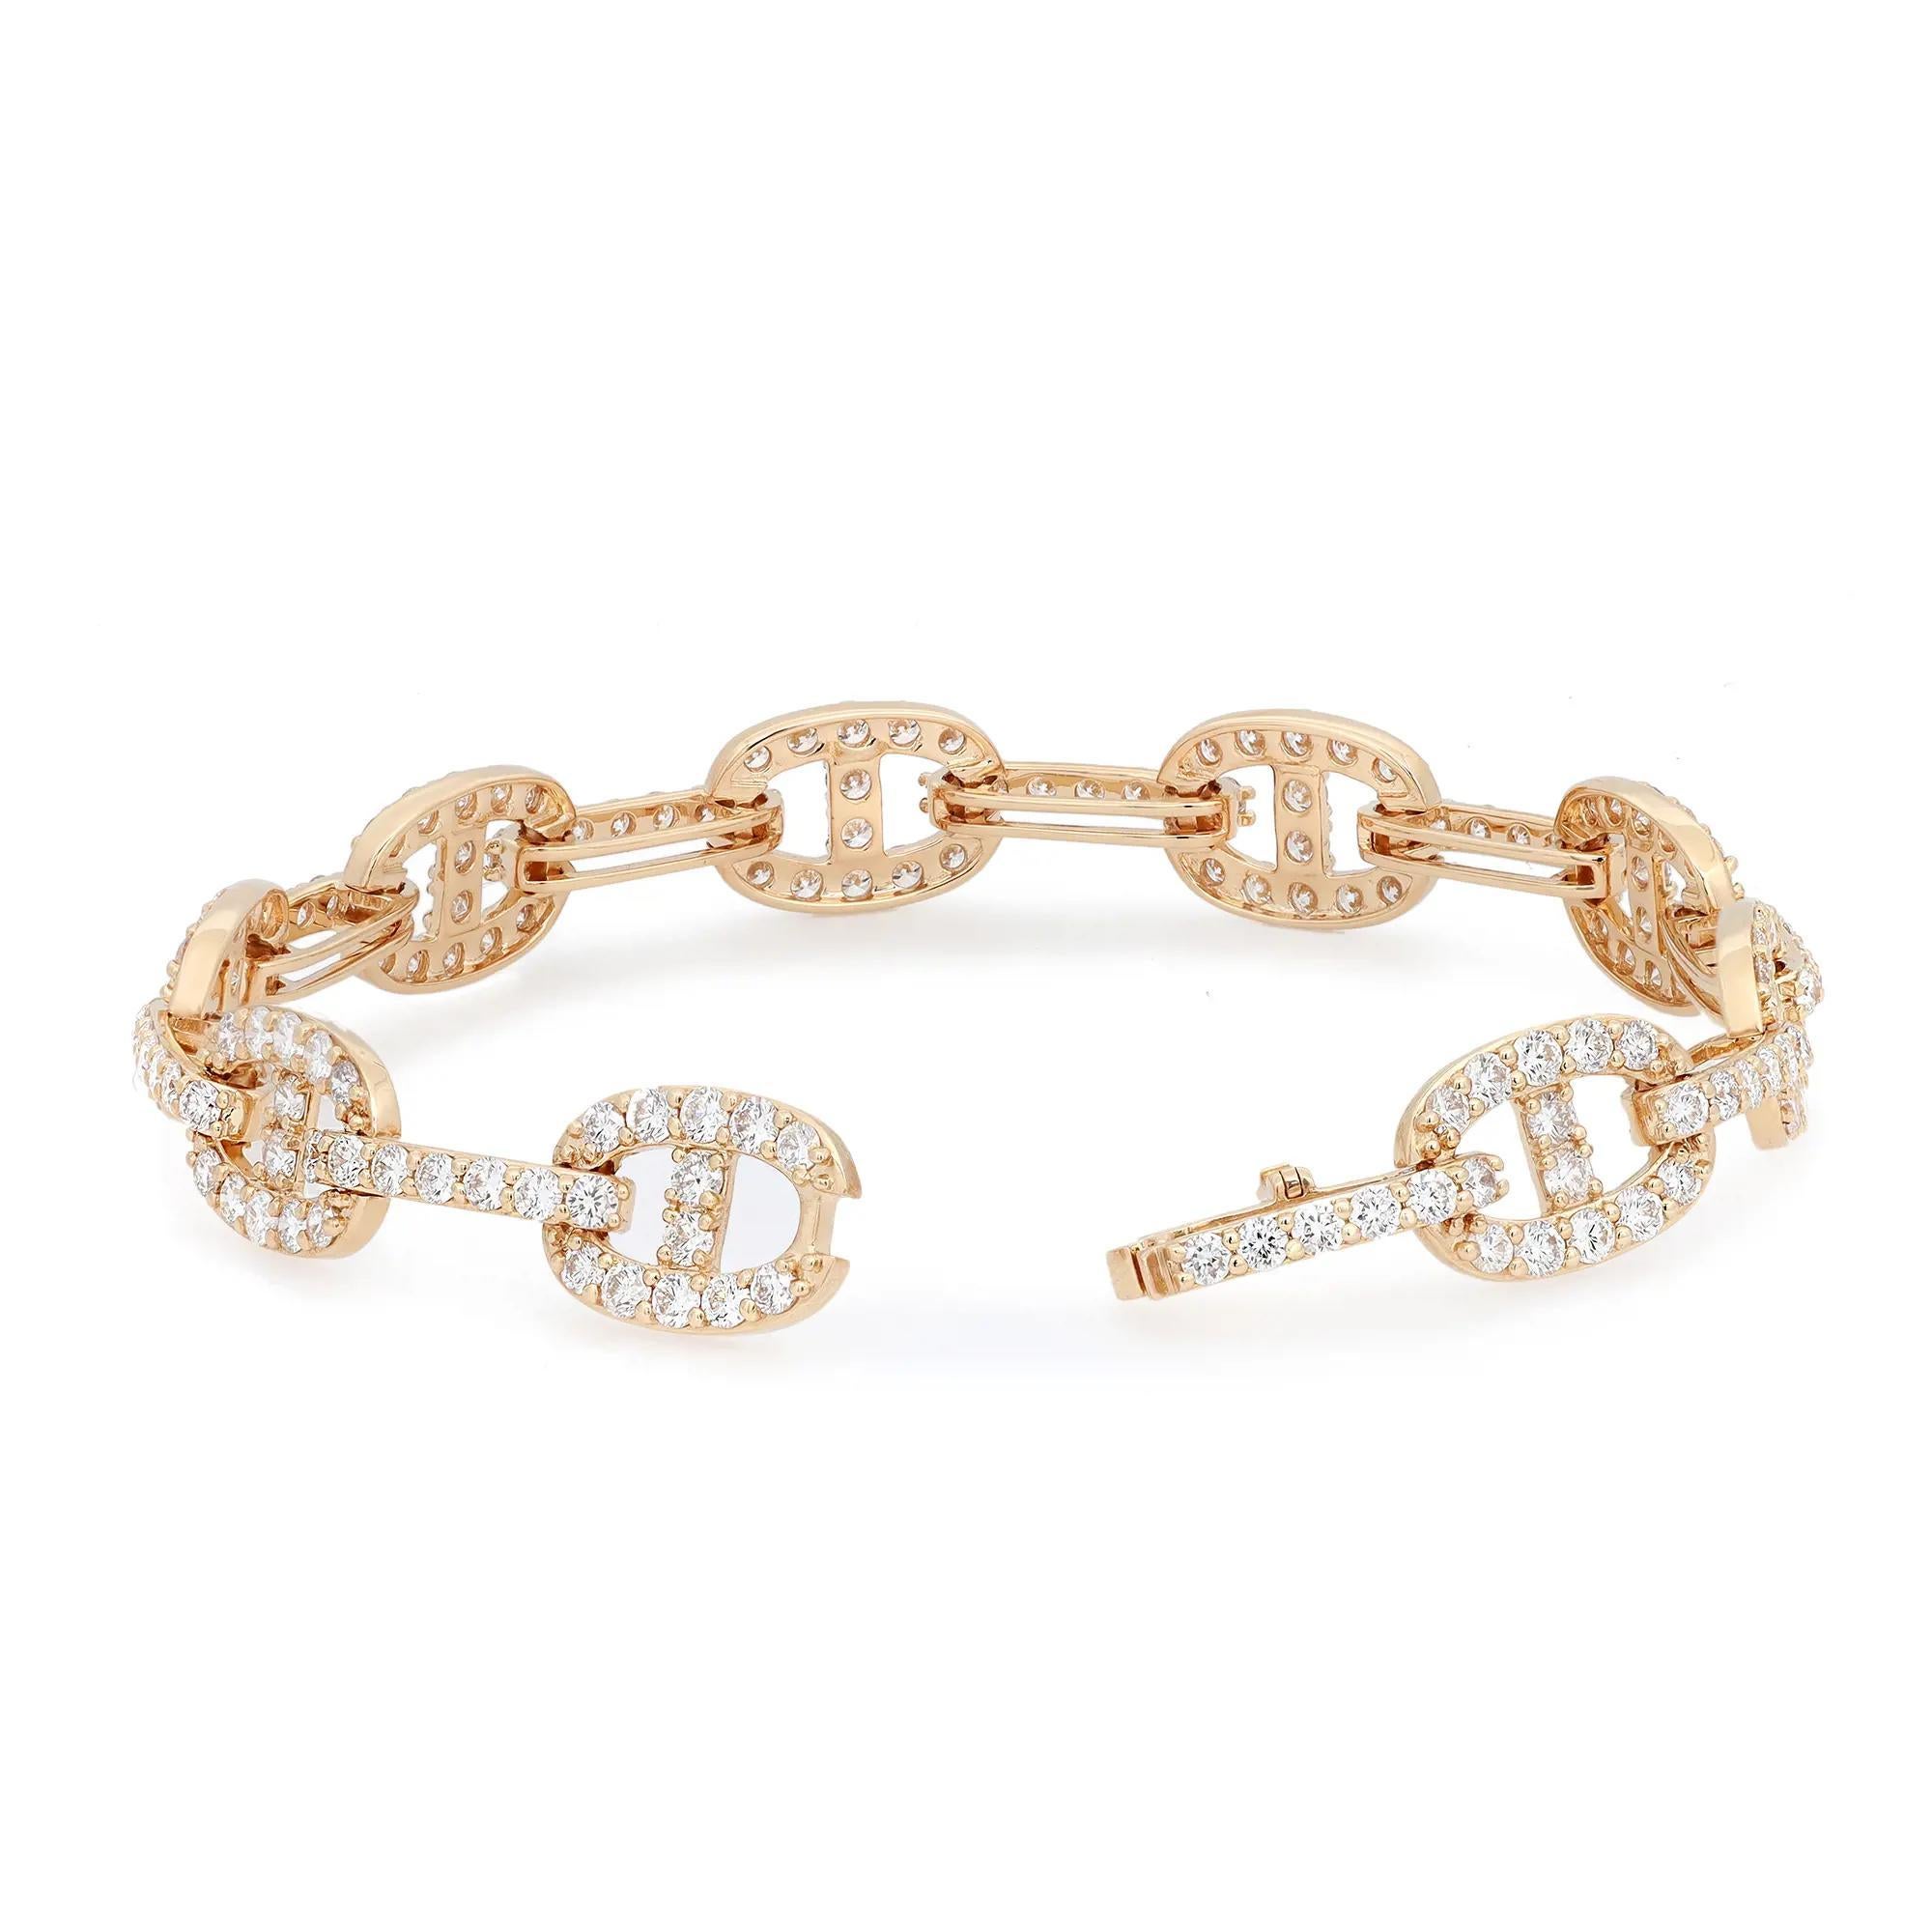 This trendy and chic bracelet features diamond studded links crafted in 18K yellow gold. Total diamond weight: 5.00 carats. Diamond quality: color G-H and clarity VS-SI. Bracelet length: 7 inches. Link size: 12.5mm x 9mm. Total weight: 14.38 grams.